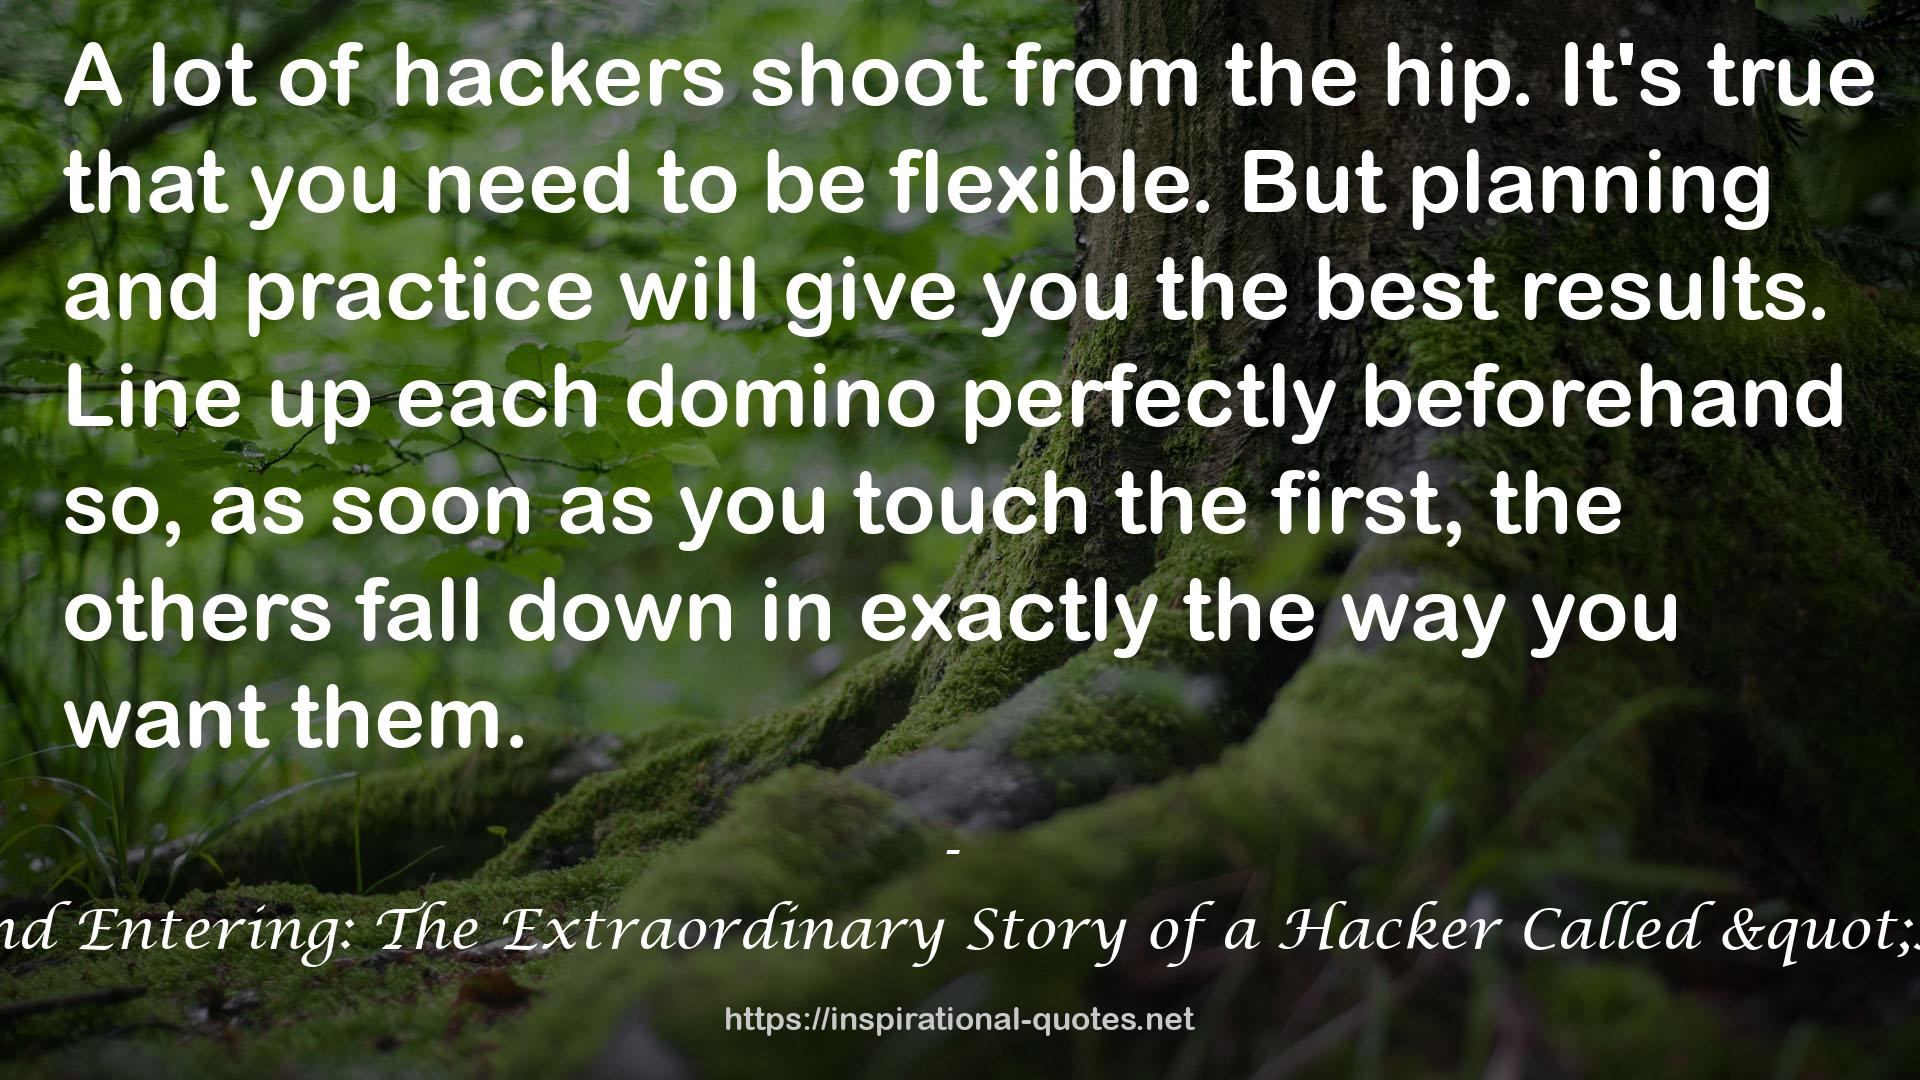 Breaking and Entering: The Extraordinary Story of a Hacker Called "Alien" QUOTES